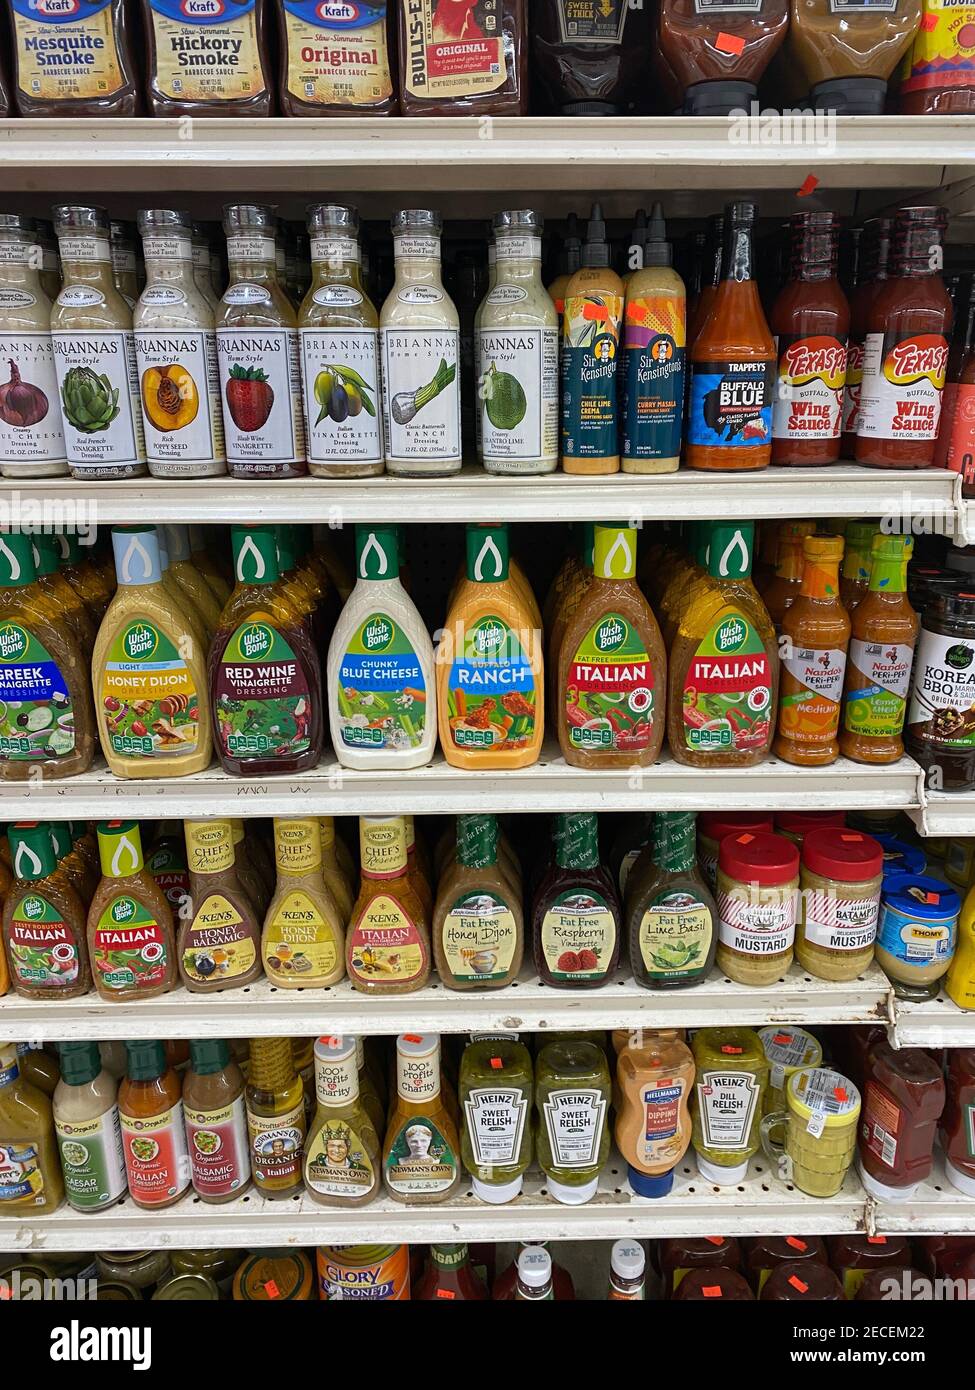 The types of salad dressings and other condiments can be dizzying with the shear numbers on the market to choose from. Stock Photo